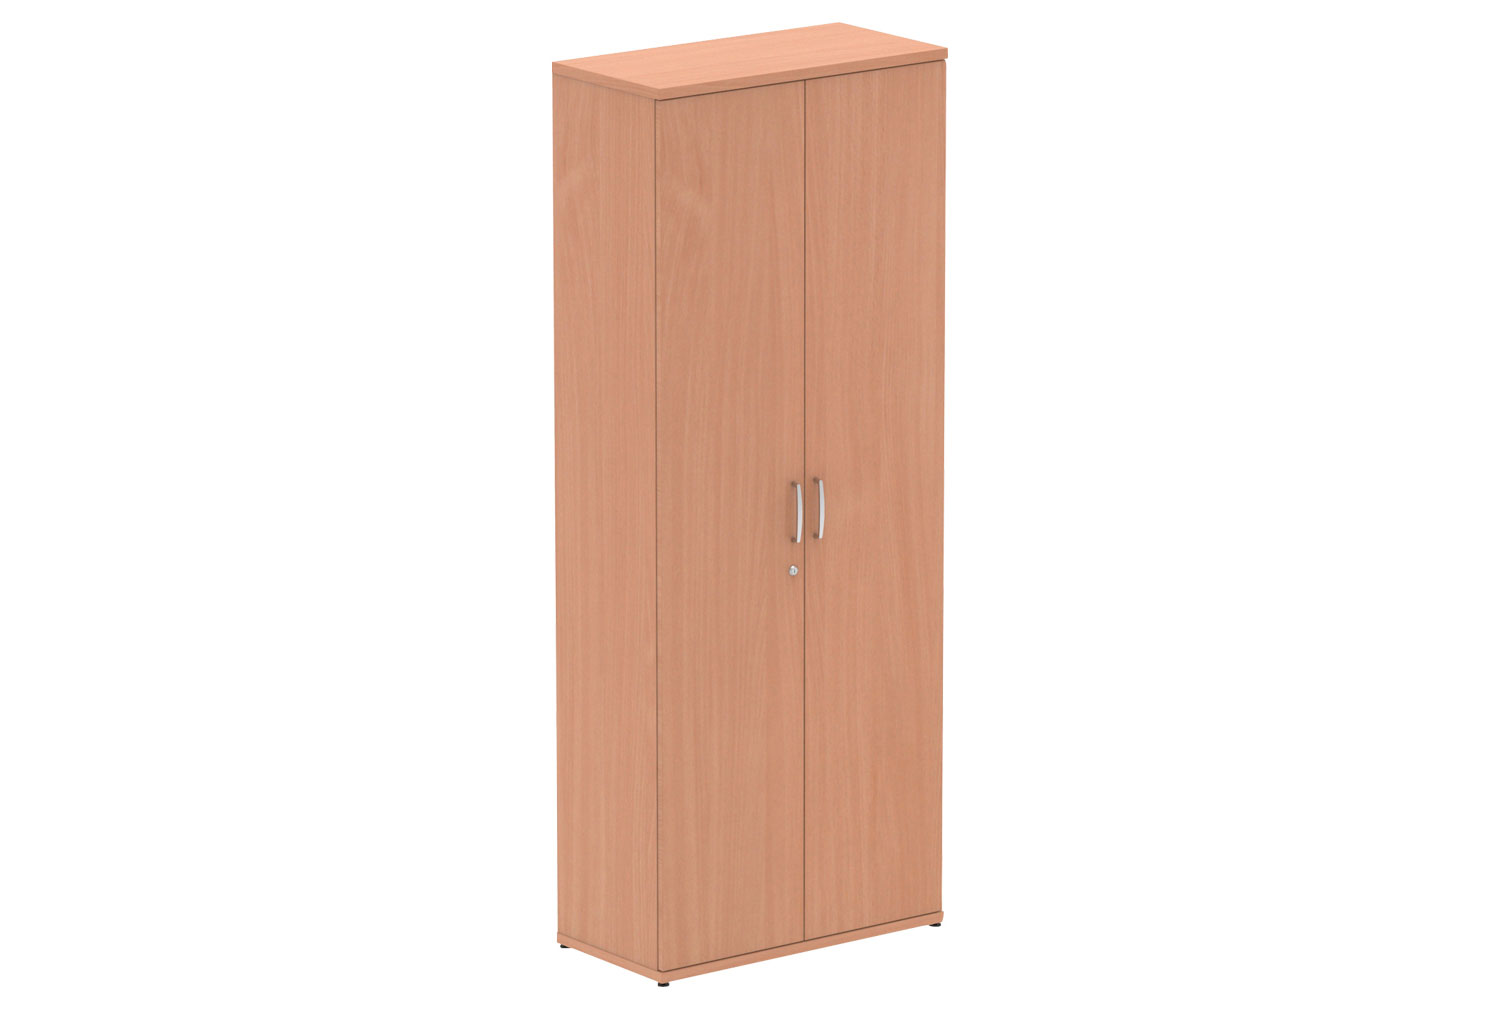 Pamola Cupboards, 4 Shelf - 80wx40dx200h (cm), Beech, Fully Installed